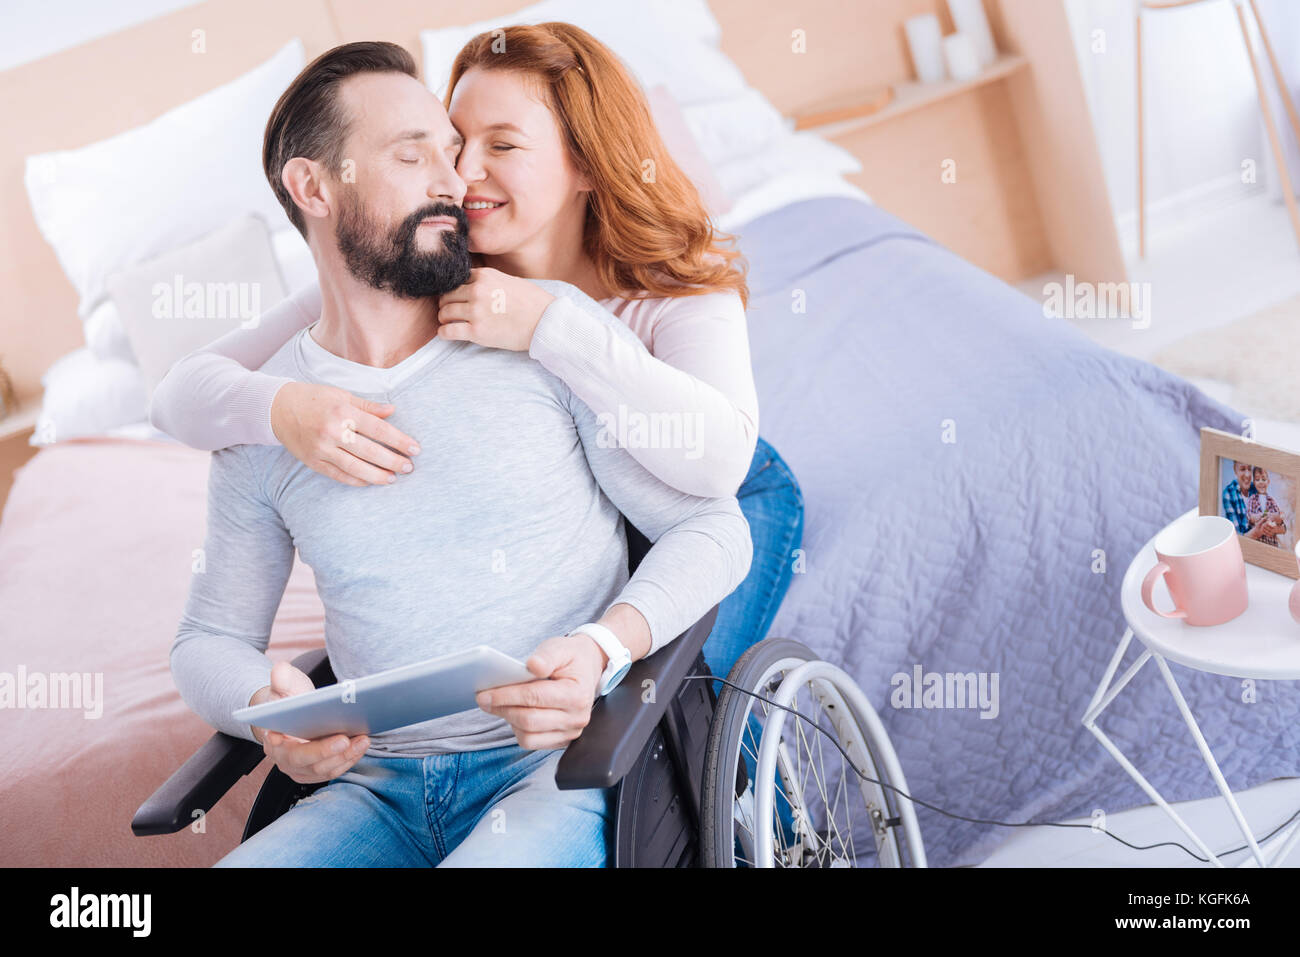 Content woman and disabled woman caressing each other Stock Photo